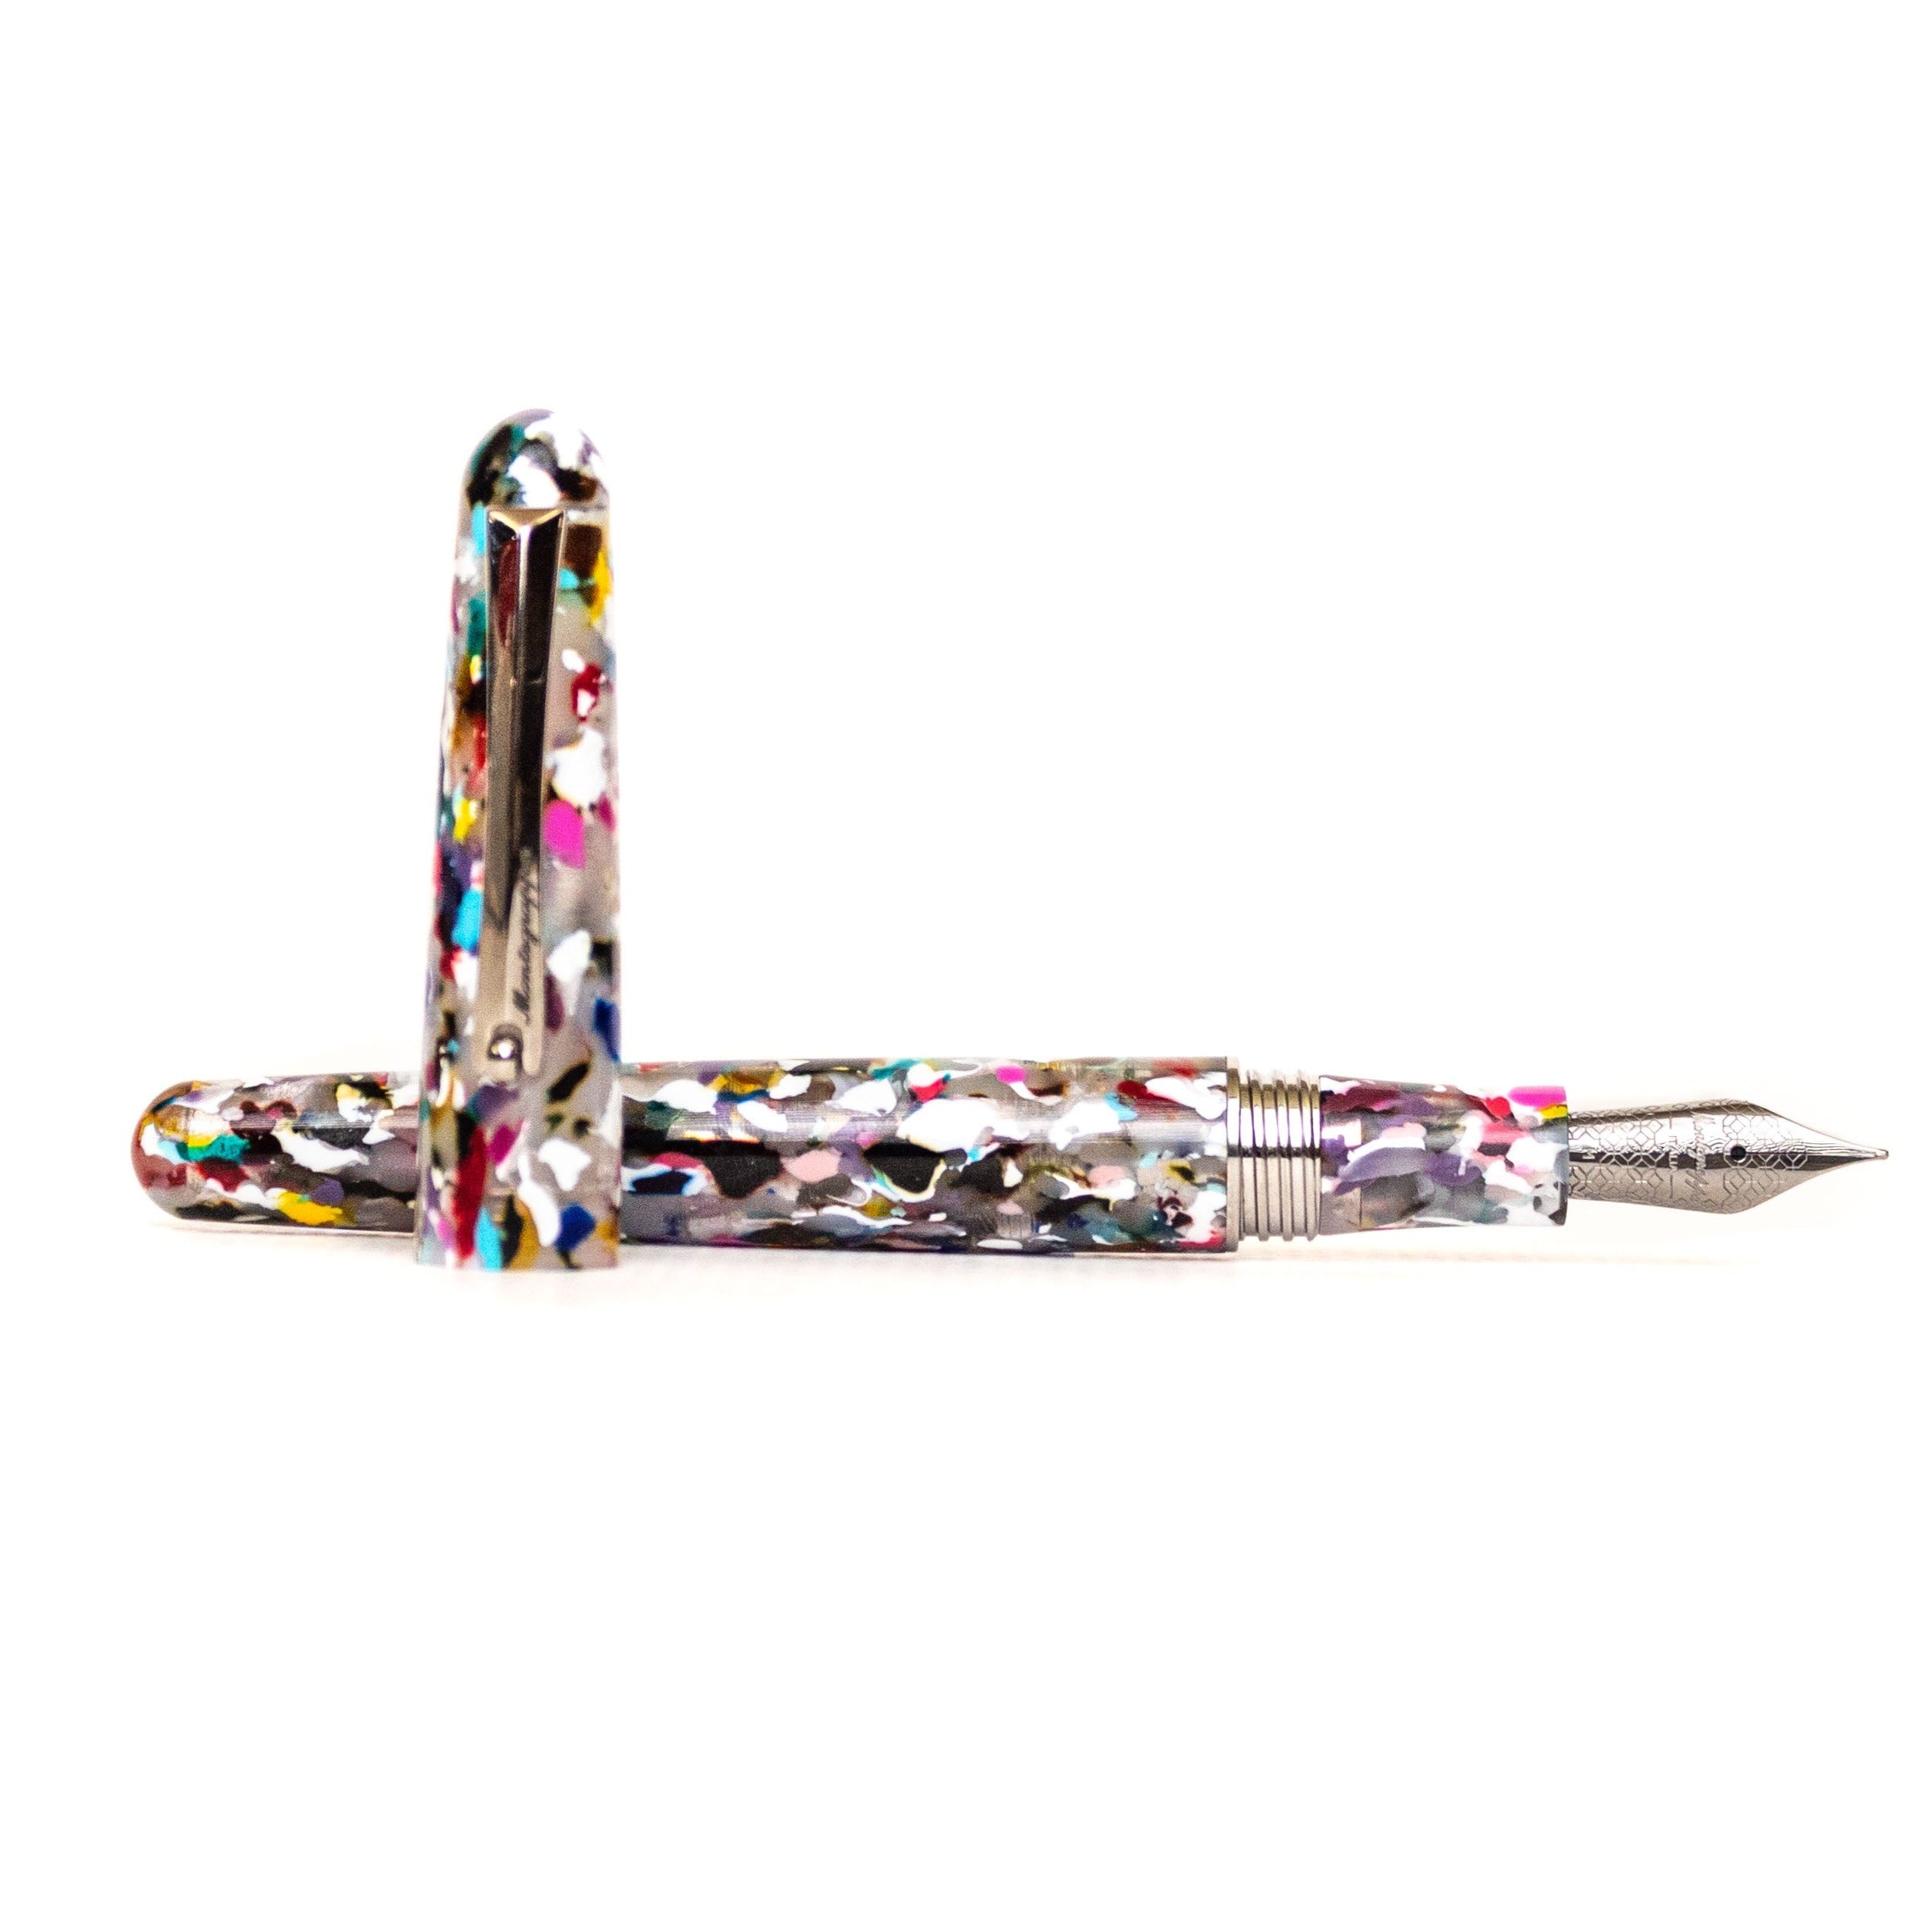 Montegrappa Recycled Materials Fountain Pen